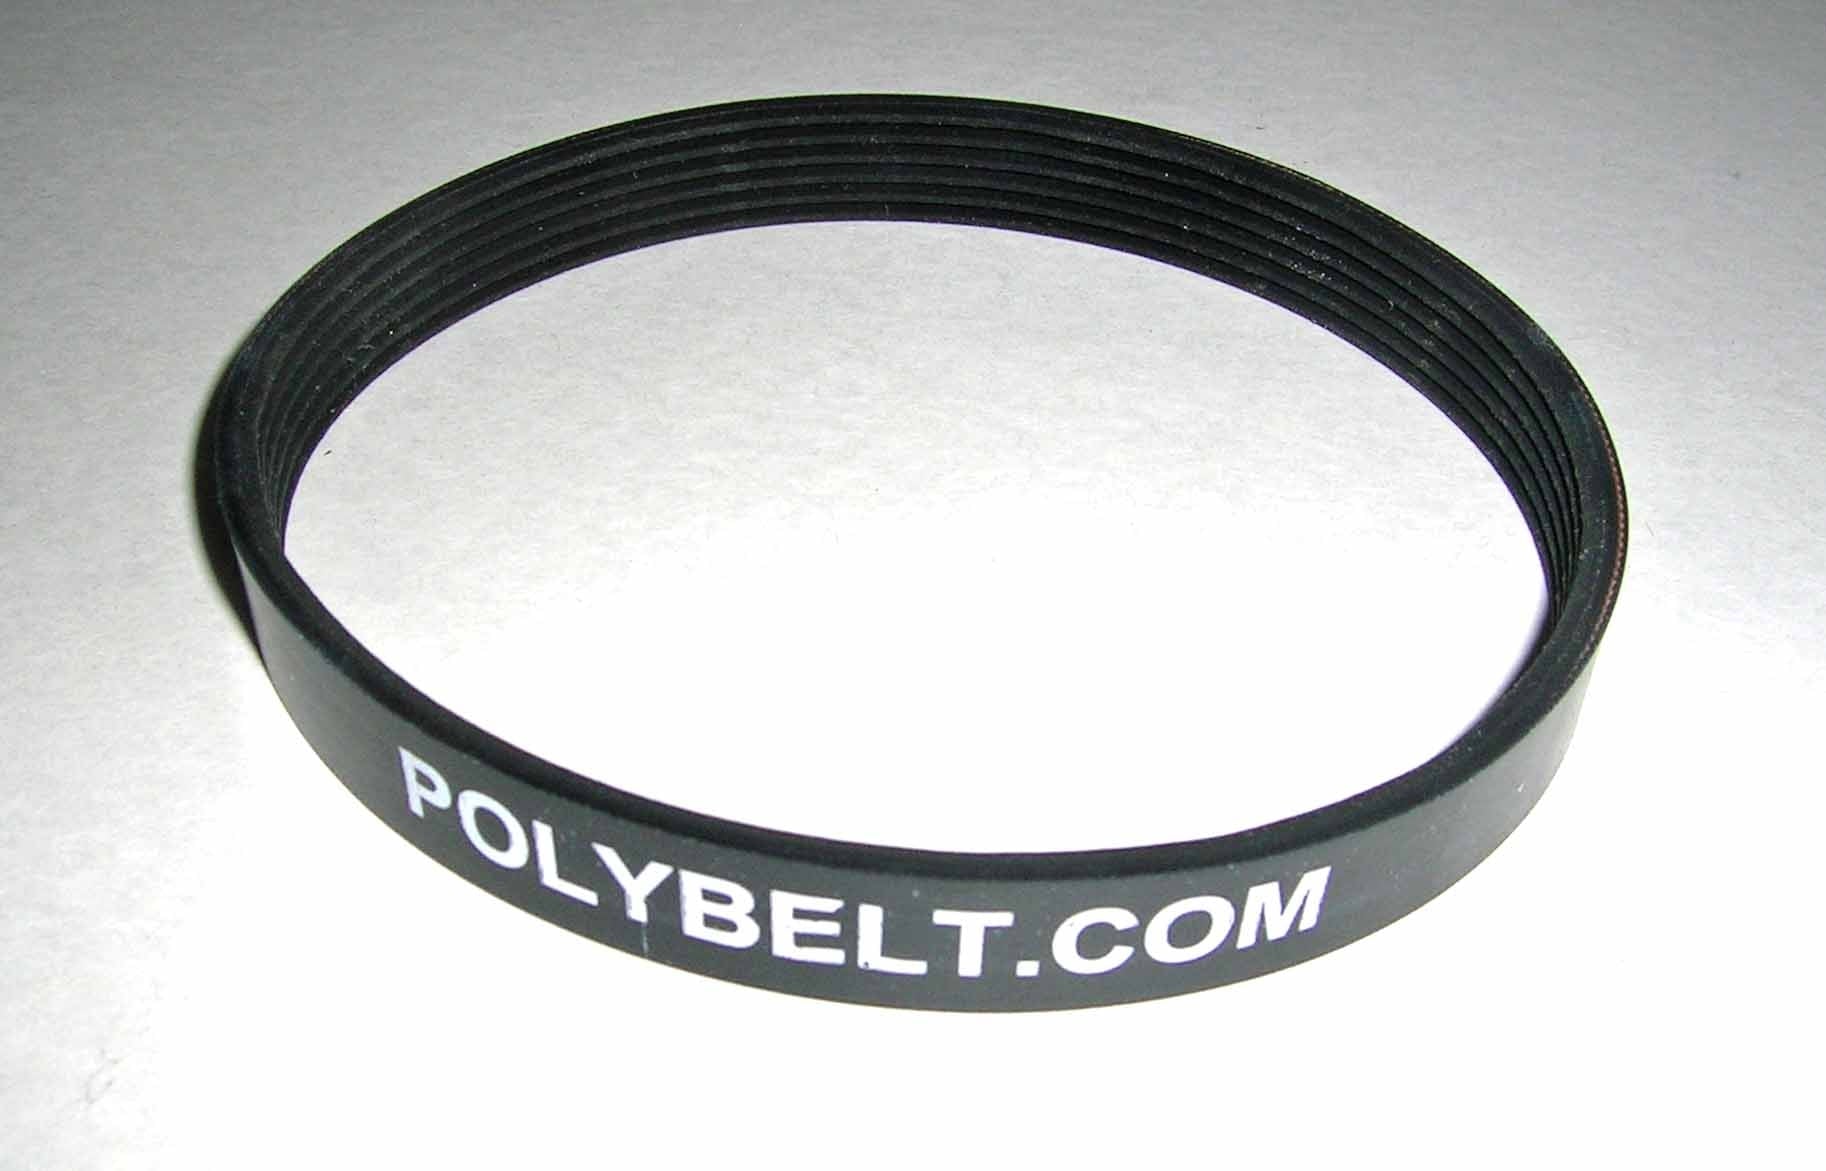 Replacement Drive BELT for JET 10" TableSaw JPS-10TS